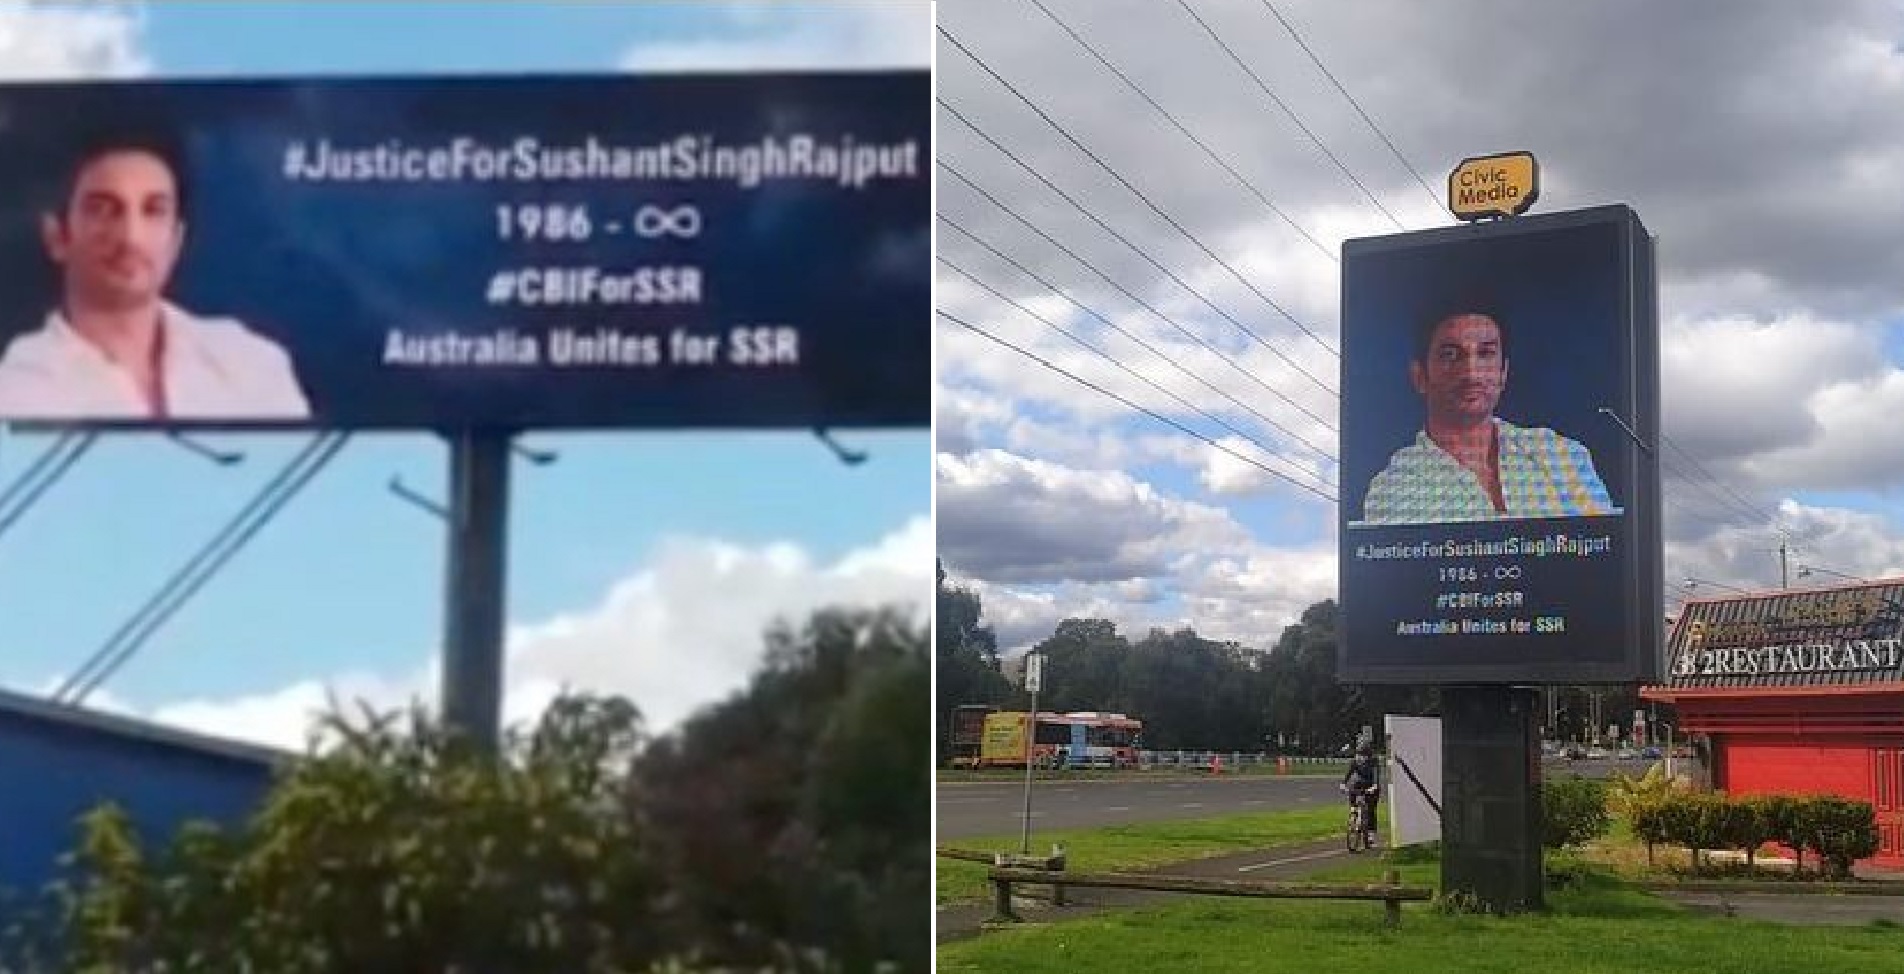 ‘Justice For Sushant Singh Rajput’ Hoarding Seen in Australia, Sister Shweta Shares Videos and Photos